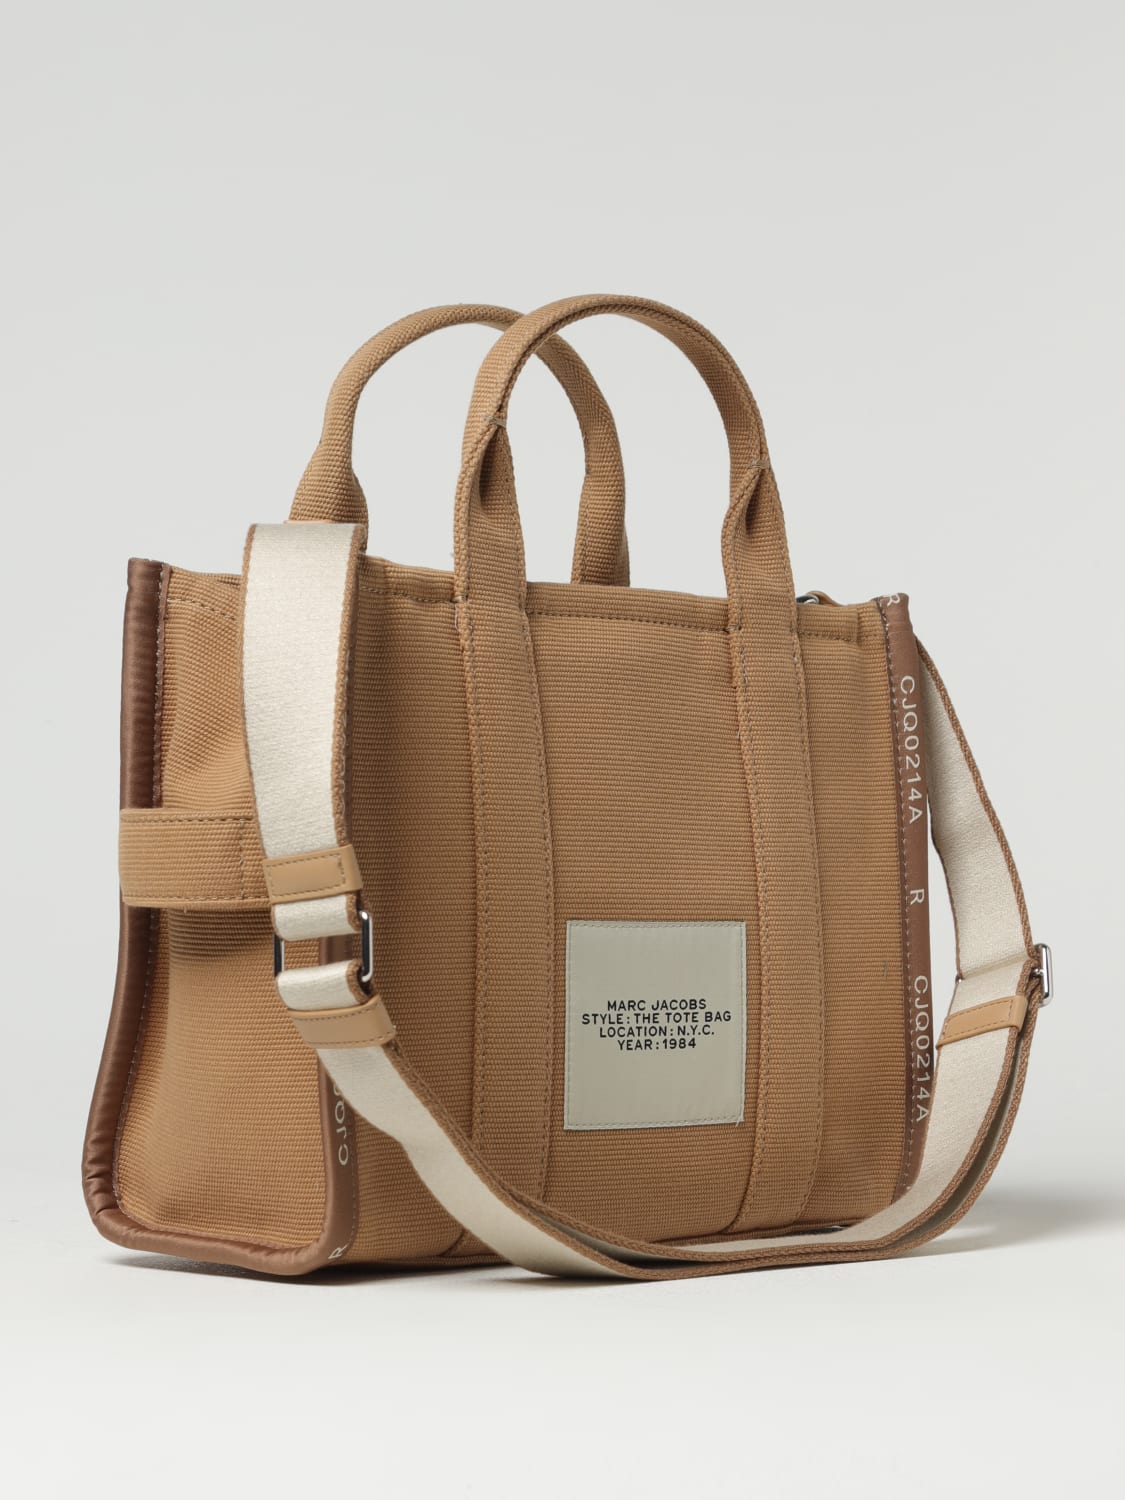 Thoughts on this Marc jacobs tote? : r/handbags